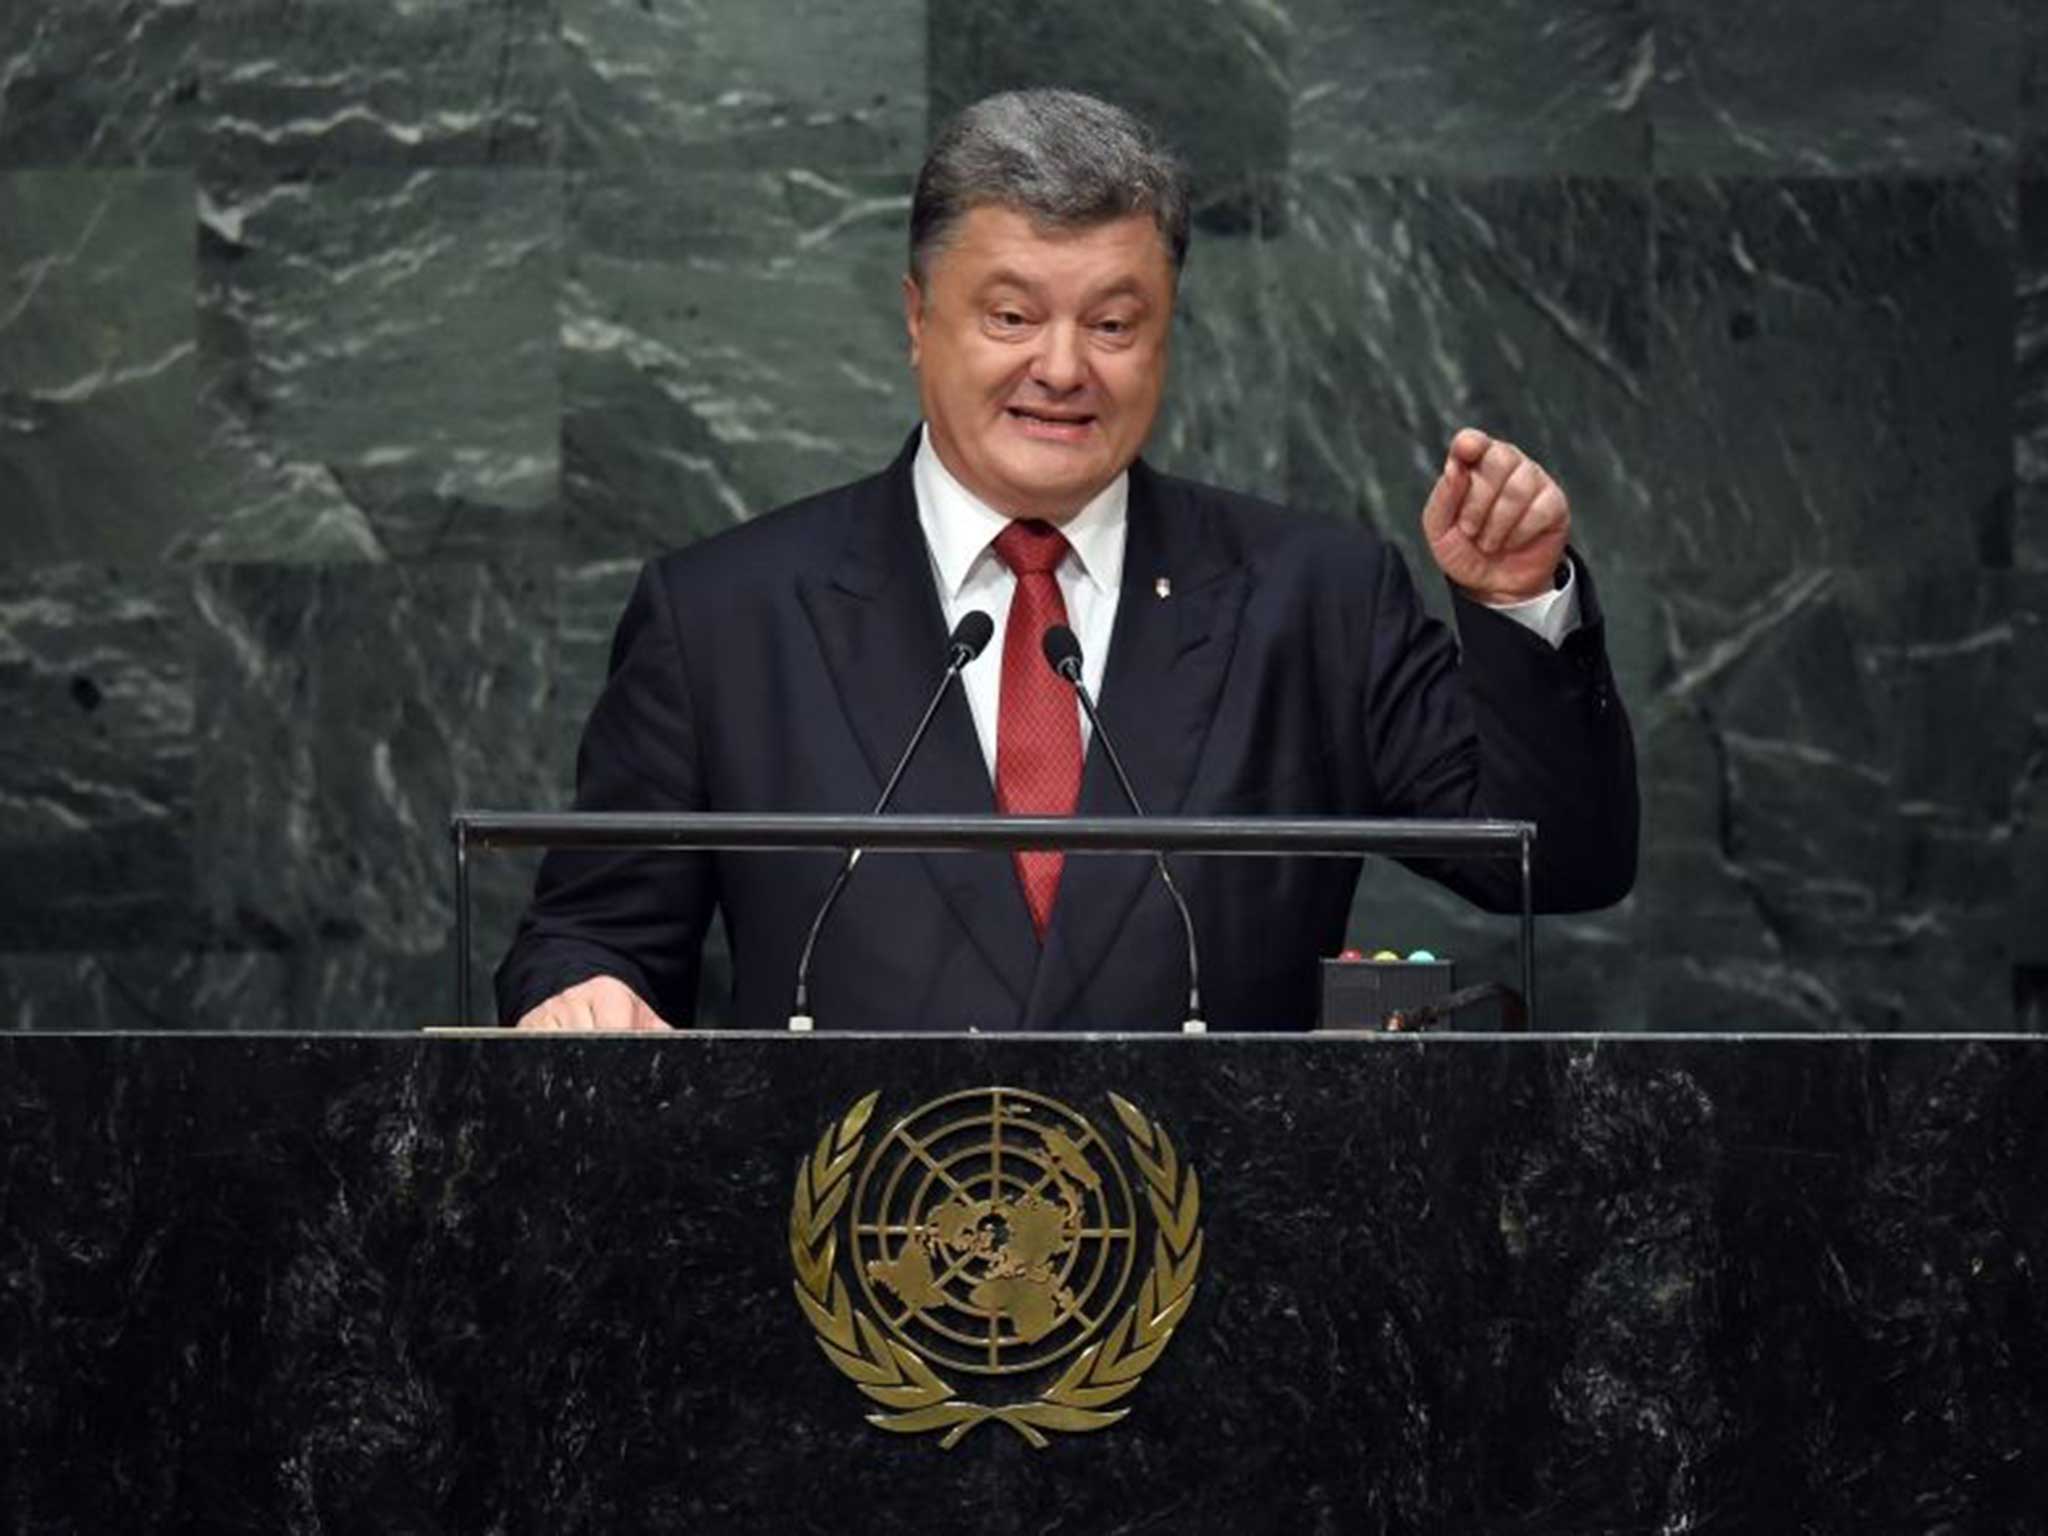 Poroshenko's remarks come as Russia launches air strikes in Syria